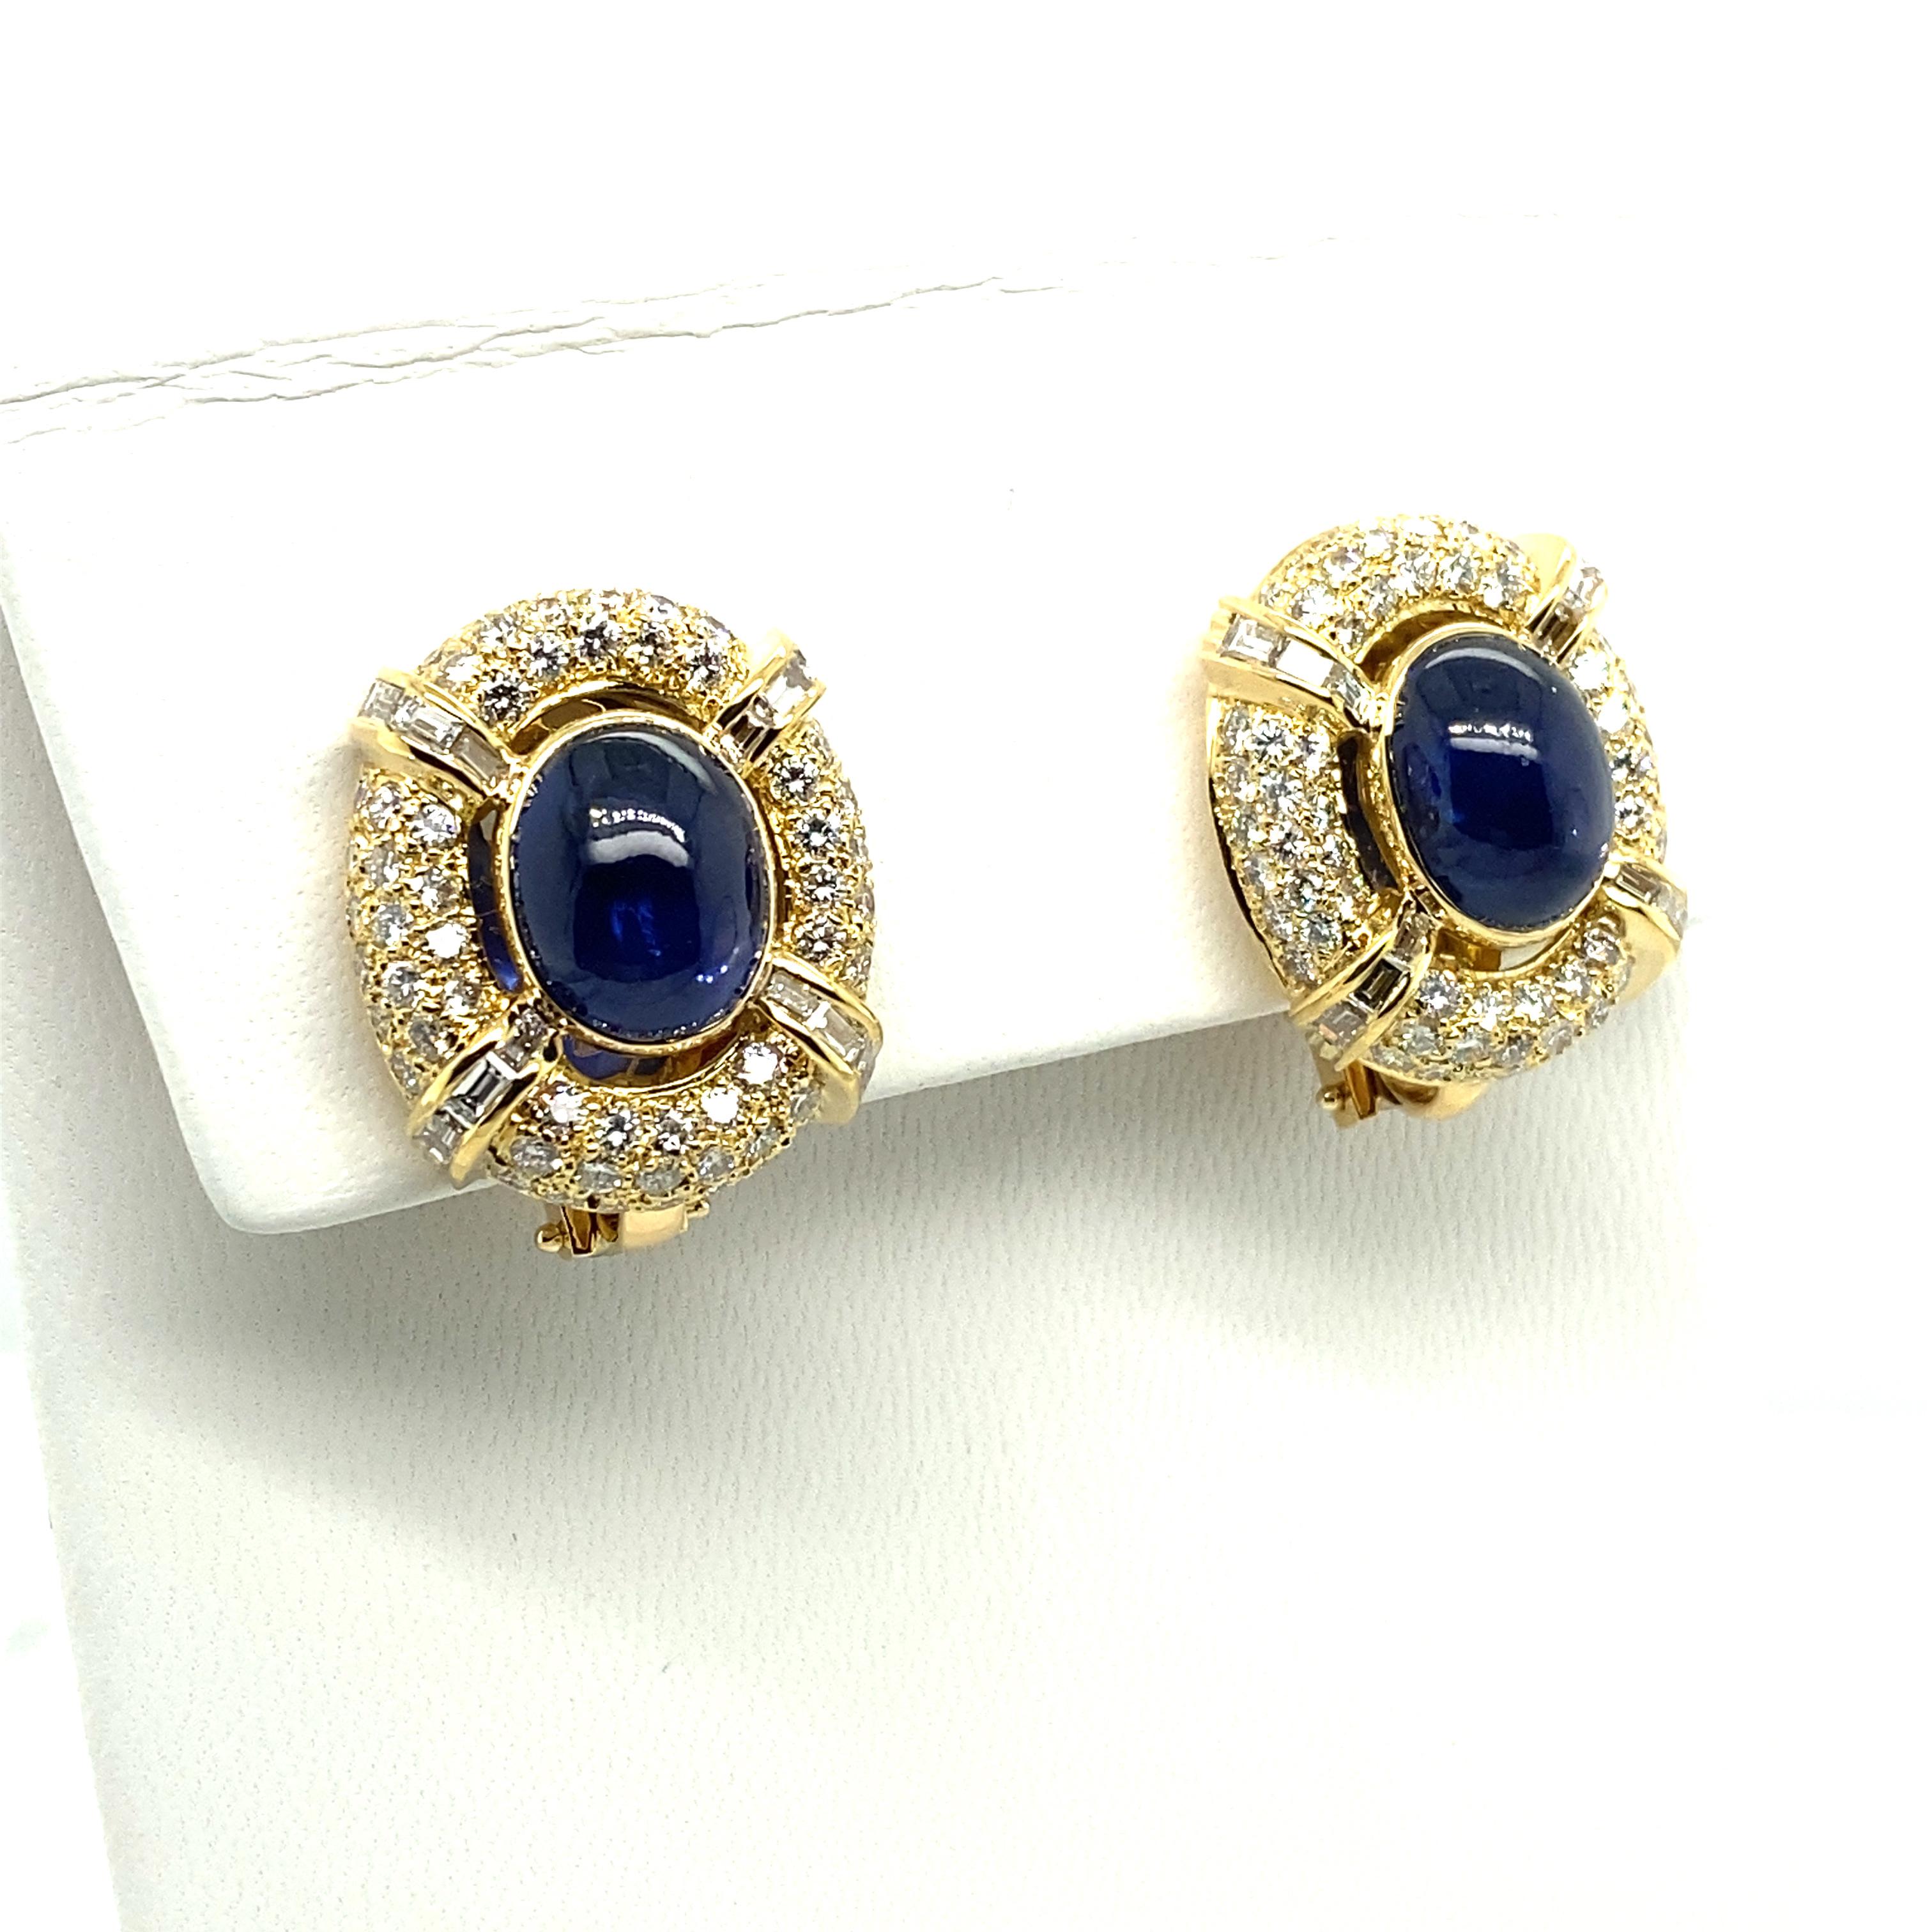 These opulently sparkling yet timelessly classic earclips from MAYOR's are crafted from 18 karat yellow gold and are bezel-set with two intense blue oval sapphire cabochons with a total weight of approximately 11.40 carats.
The entourages are pavé